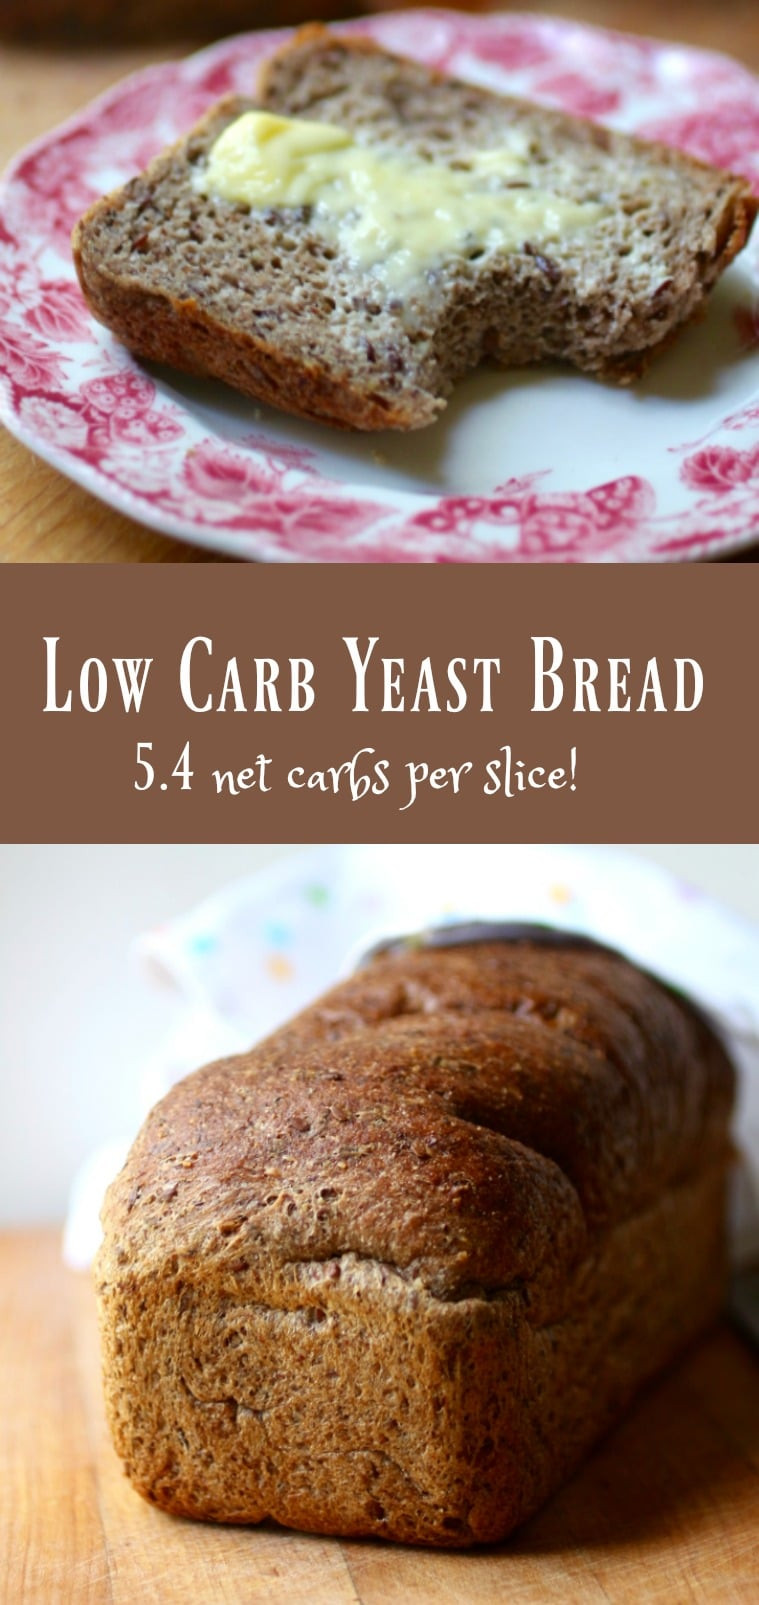 Low Carb Bread Recipes Atkins Diet
 Low Carb Yeast Bread Keto Sandwich Bread lowcarb ology